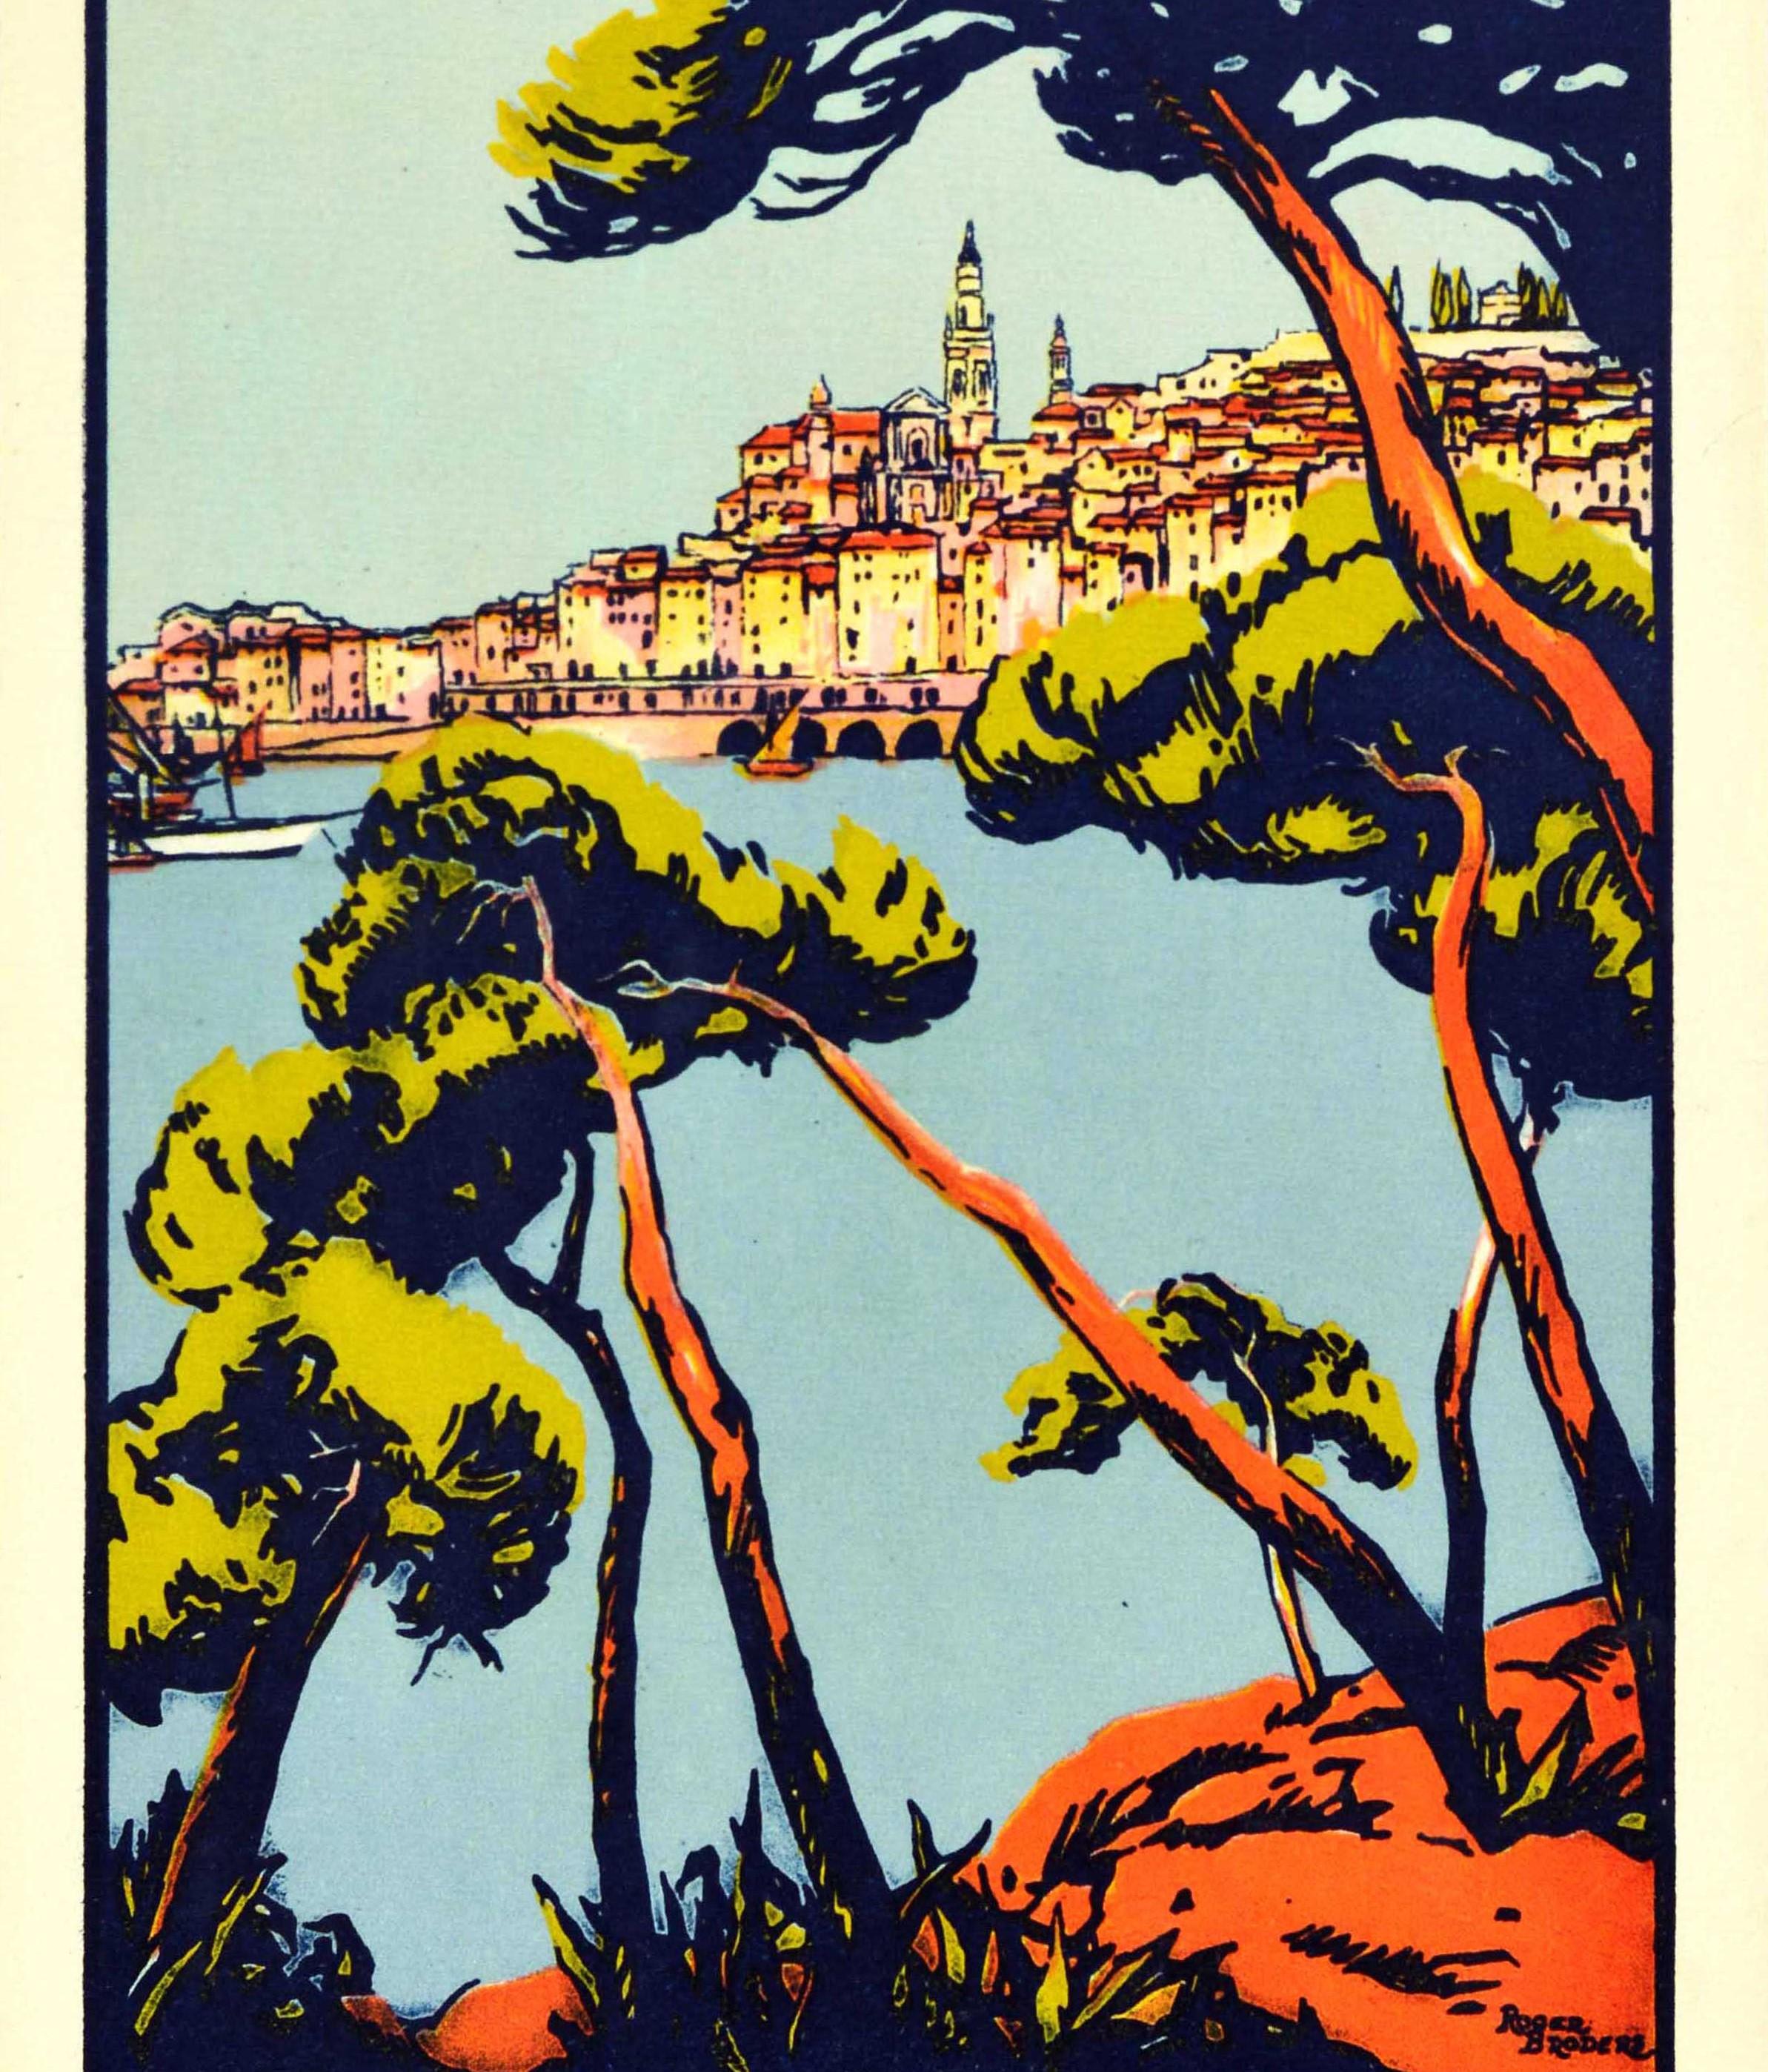 Original vintage travel advertising poster issued by the PLM Paris Lyon Mediterranee railway to promote the harbour town of Menton on the French Riviera featuring stunning artwork by the notable French artist Roger Broders (1883-1953) depicting a